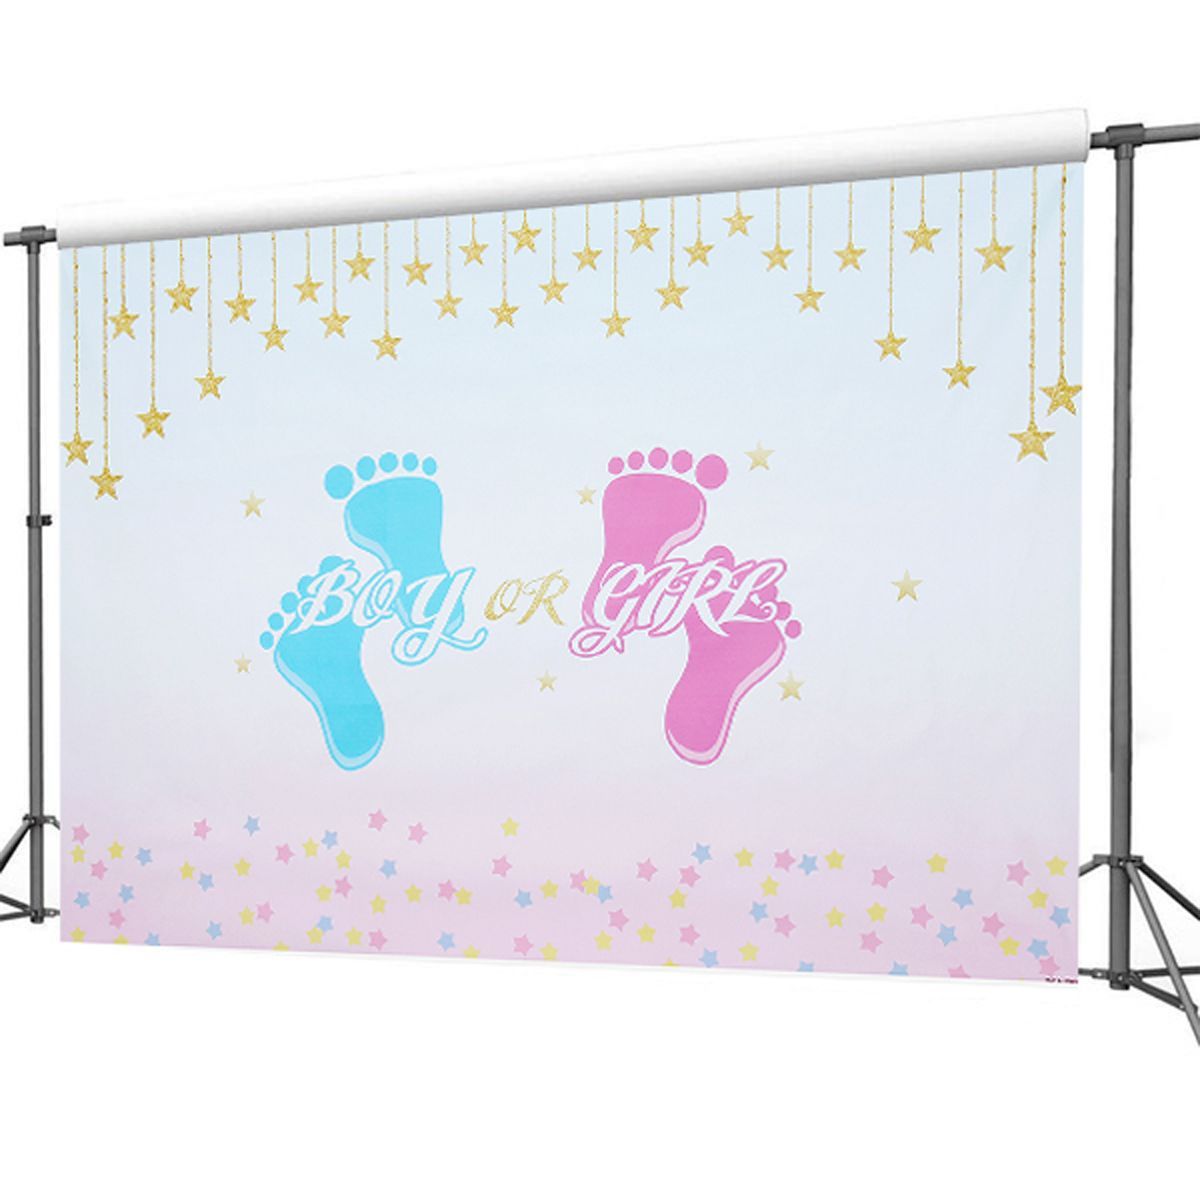 5x3FT-7x5FT-9x6FT-Foot-Print-Boy-or-Girl-Photography-Backdrop-Background-Studio-Prop-1636207